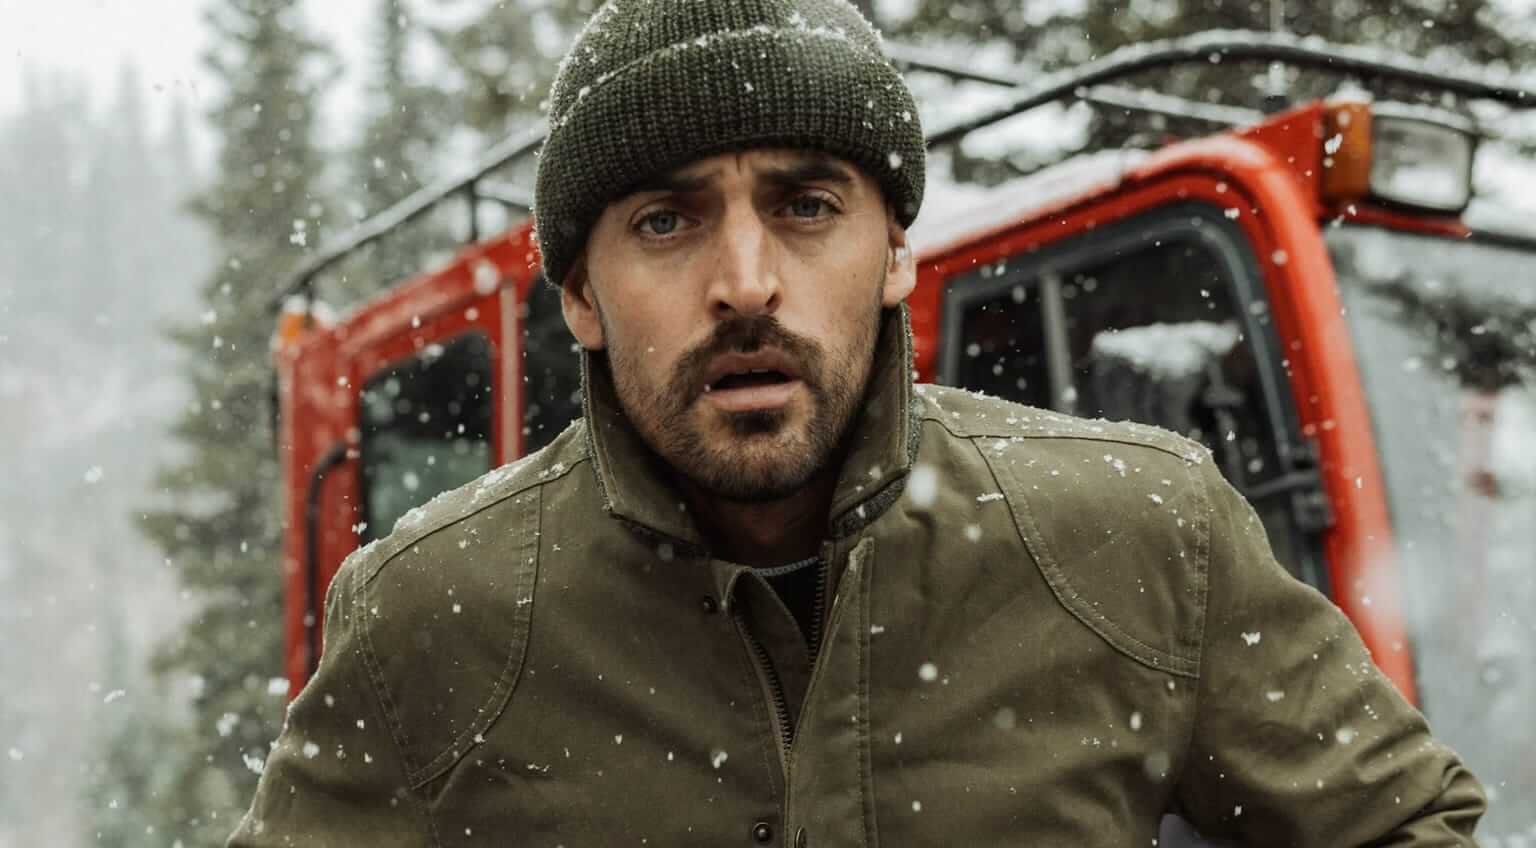 Elevate Your Winter Workwear: Huckberry's Cold-Weather Office